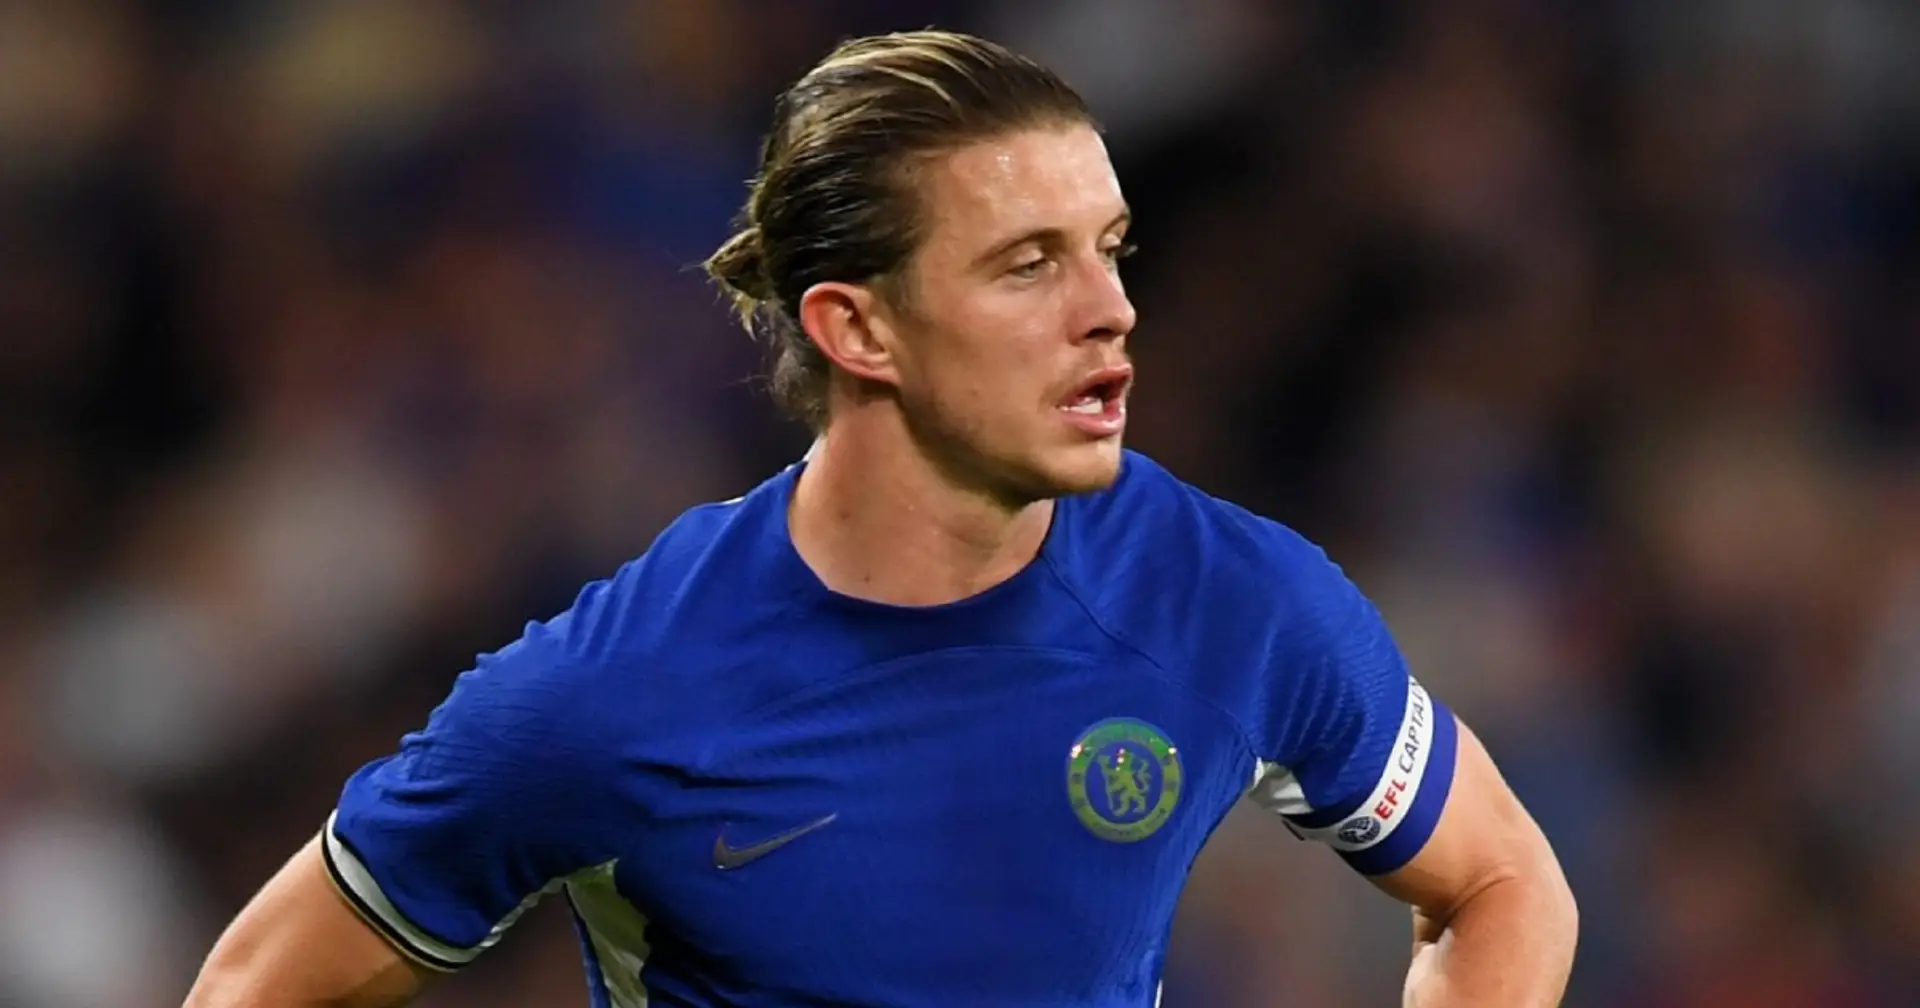 'Chelsea previously reluctant to offer new deal': Gallagher contract latest as 4 clubs show interest (reliability: 5 stars)